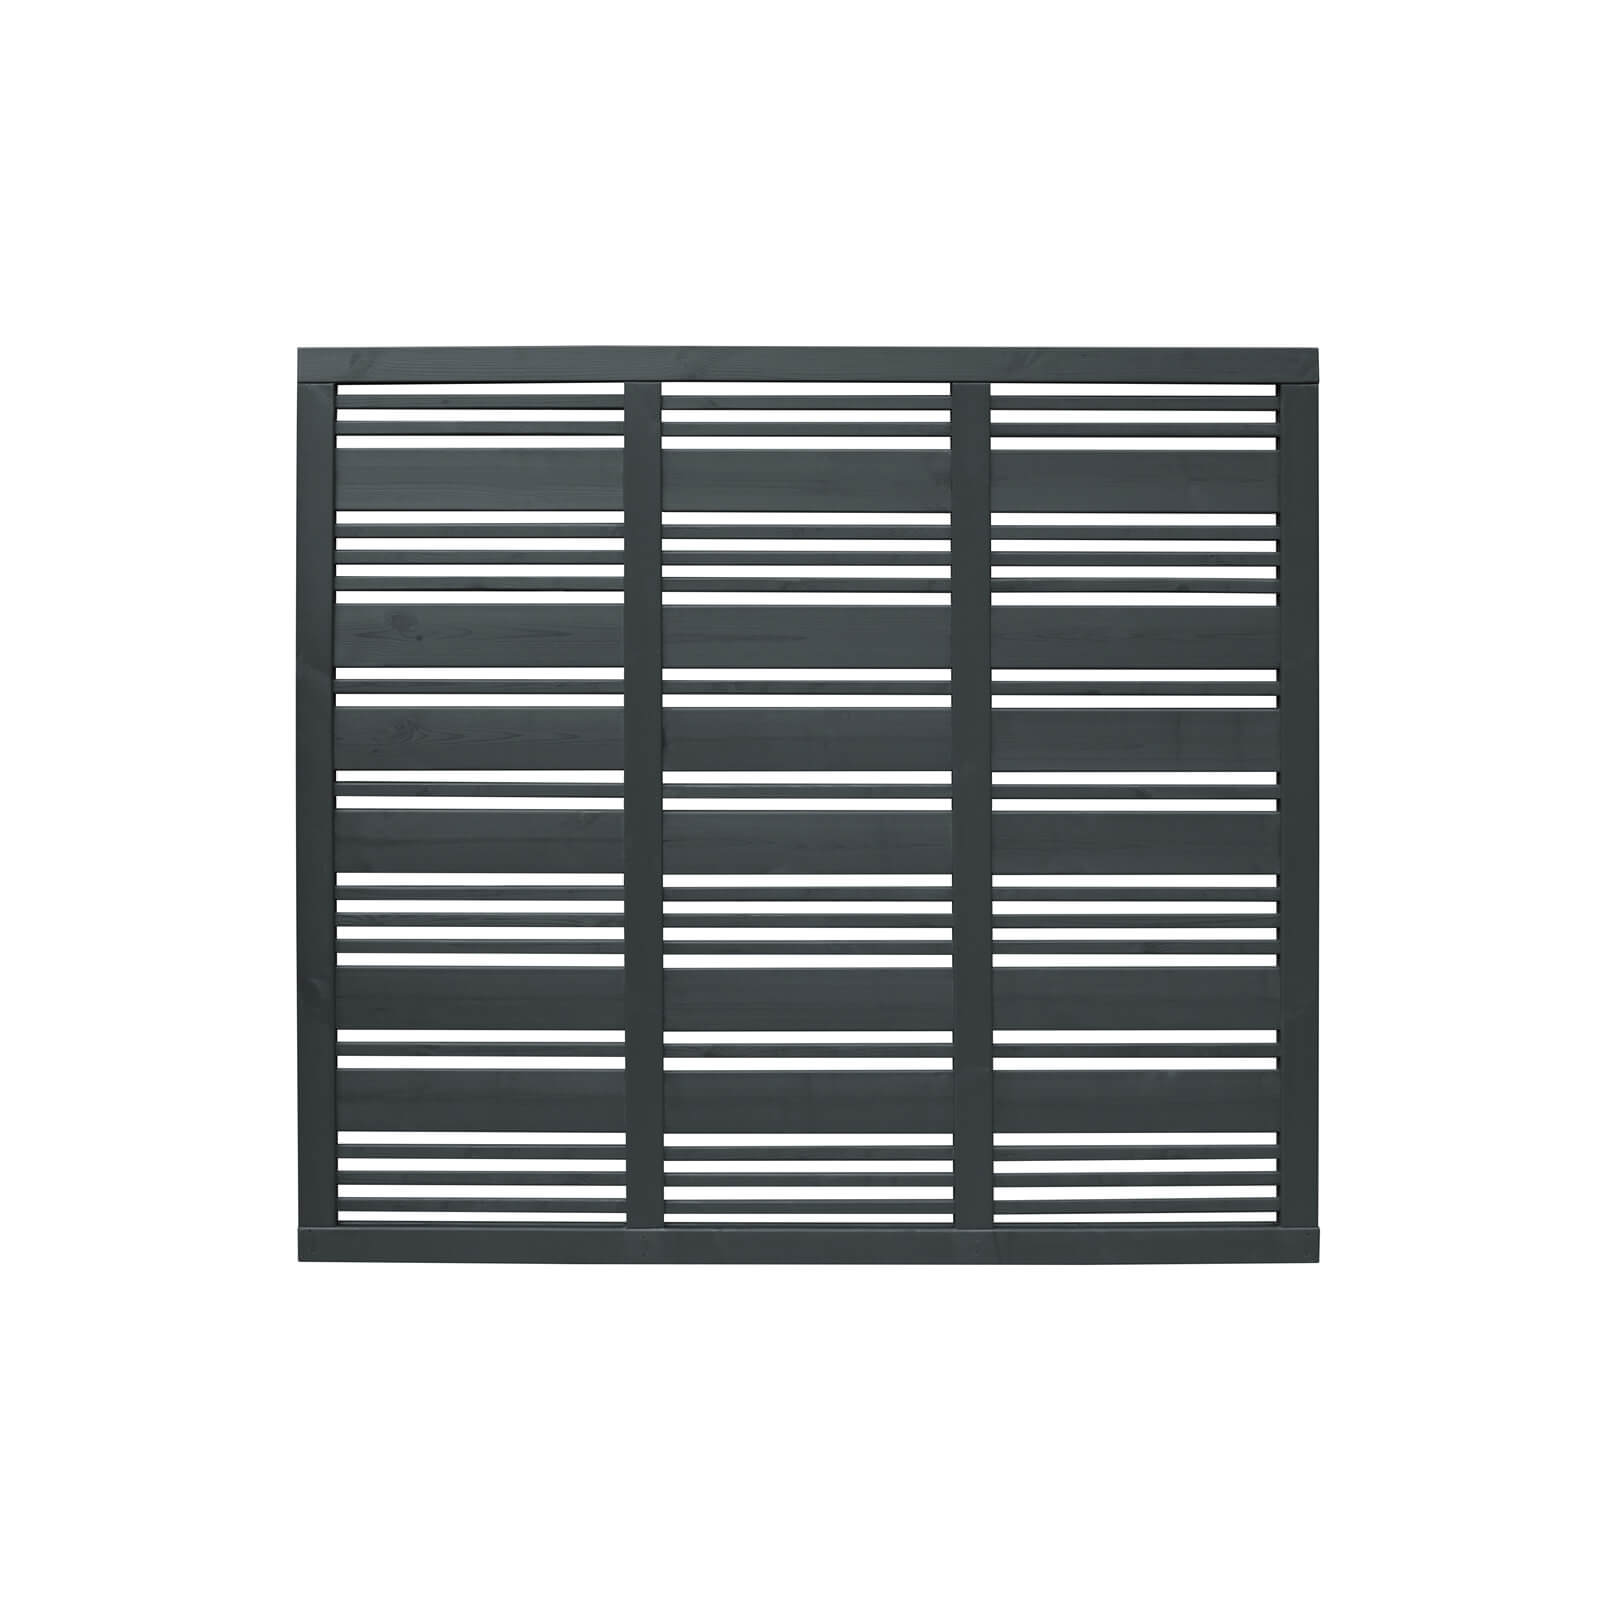 6ft x 6ft (1.8m x 1.8m) Grey Painted Contemporary Mix Slatted Fence Panel - Pack of 3